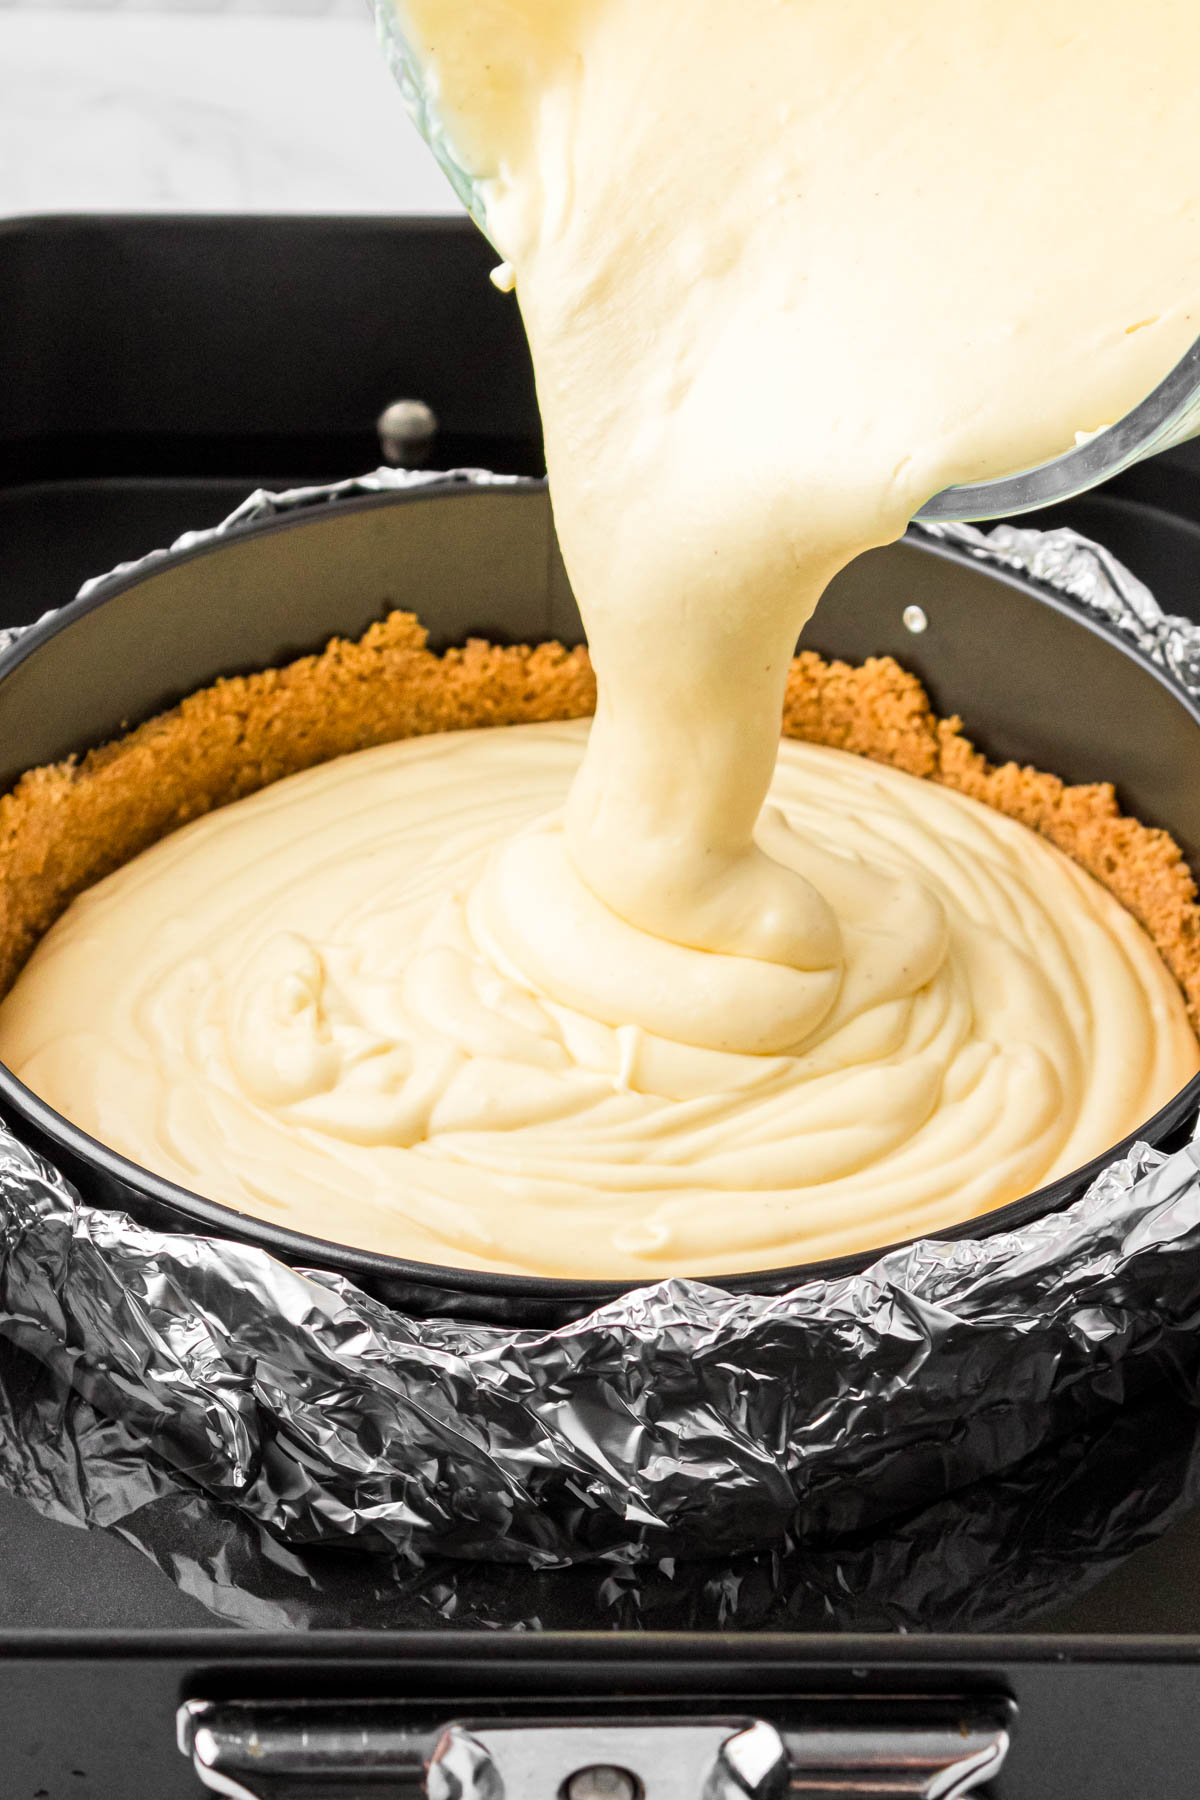 Cheesecake batter being poured into a springform pan wrapped in aluminum foil in a water bath.